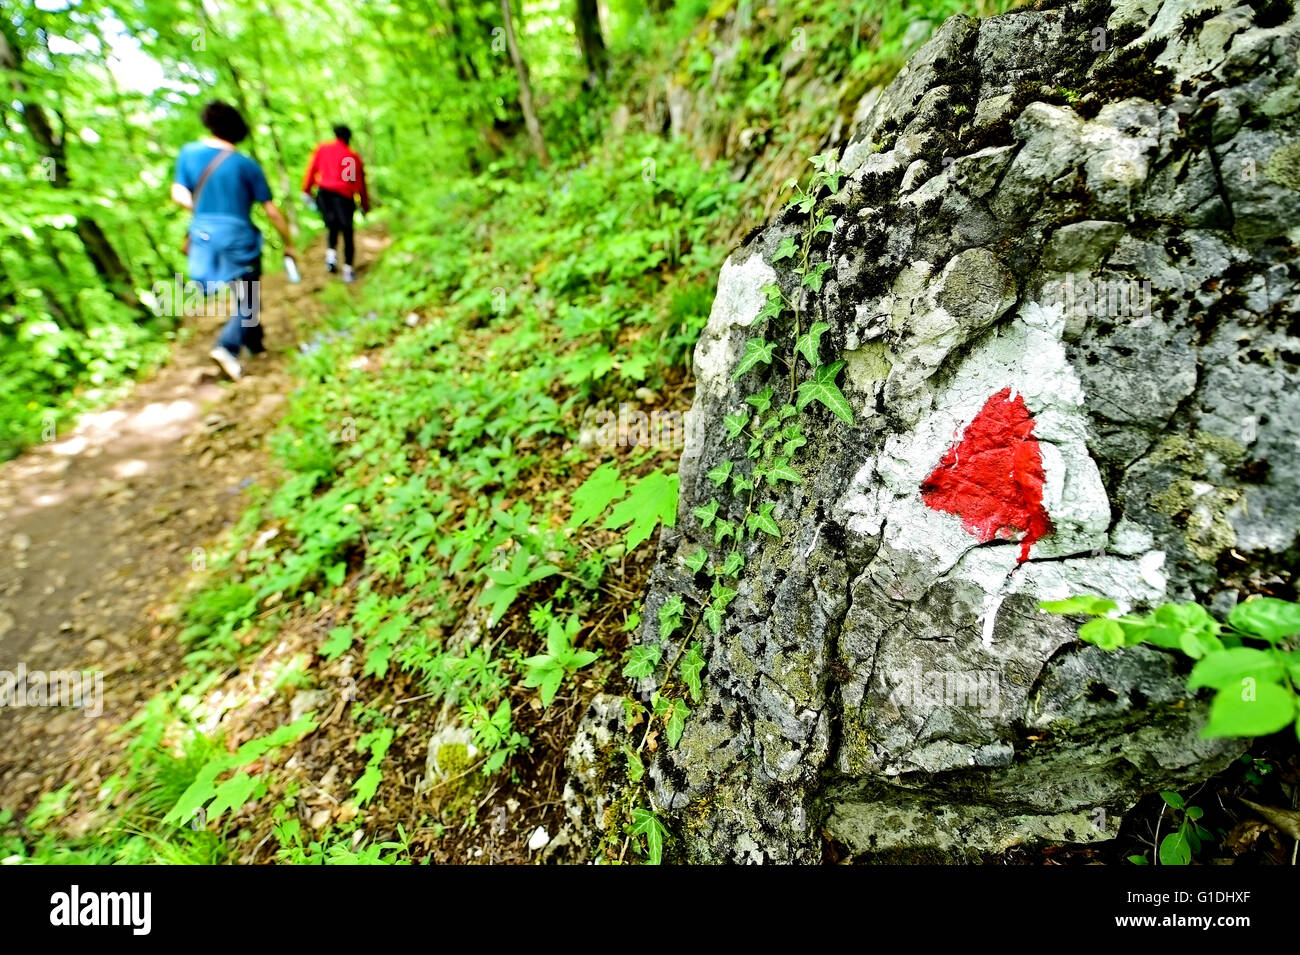 Hiking red triangle paint marking on a rock with hiker on the trail Stock Photo